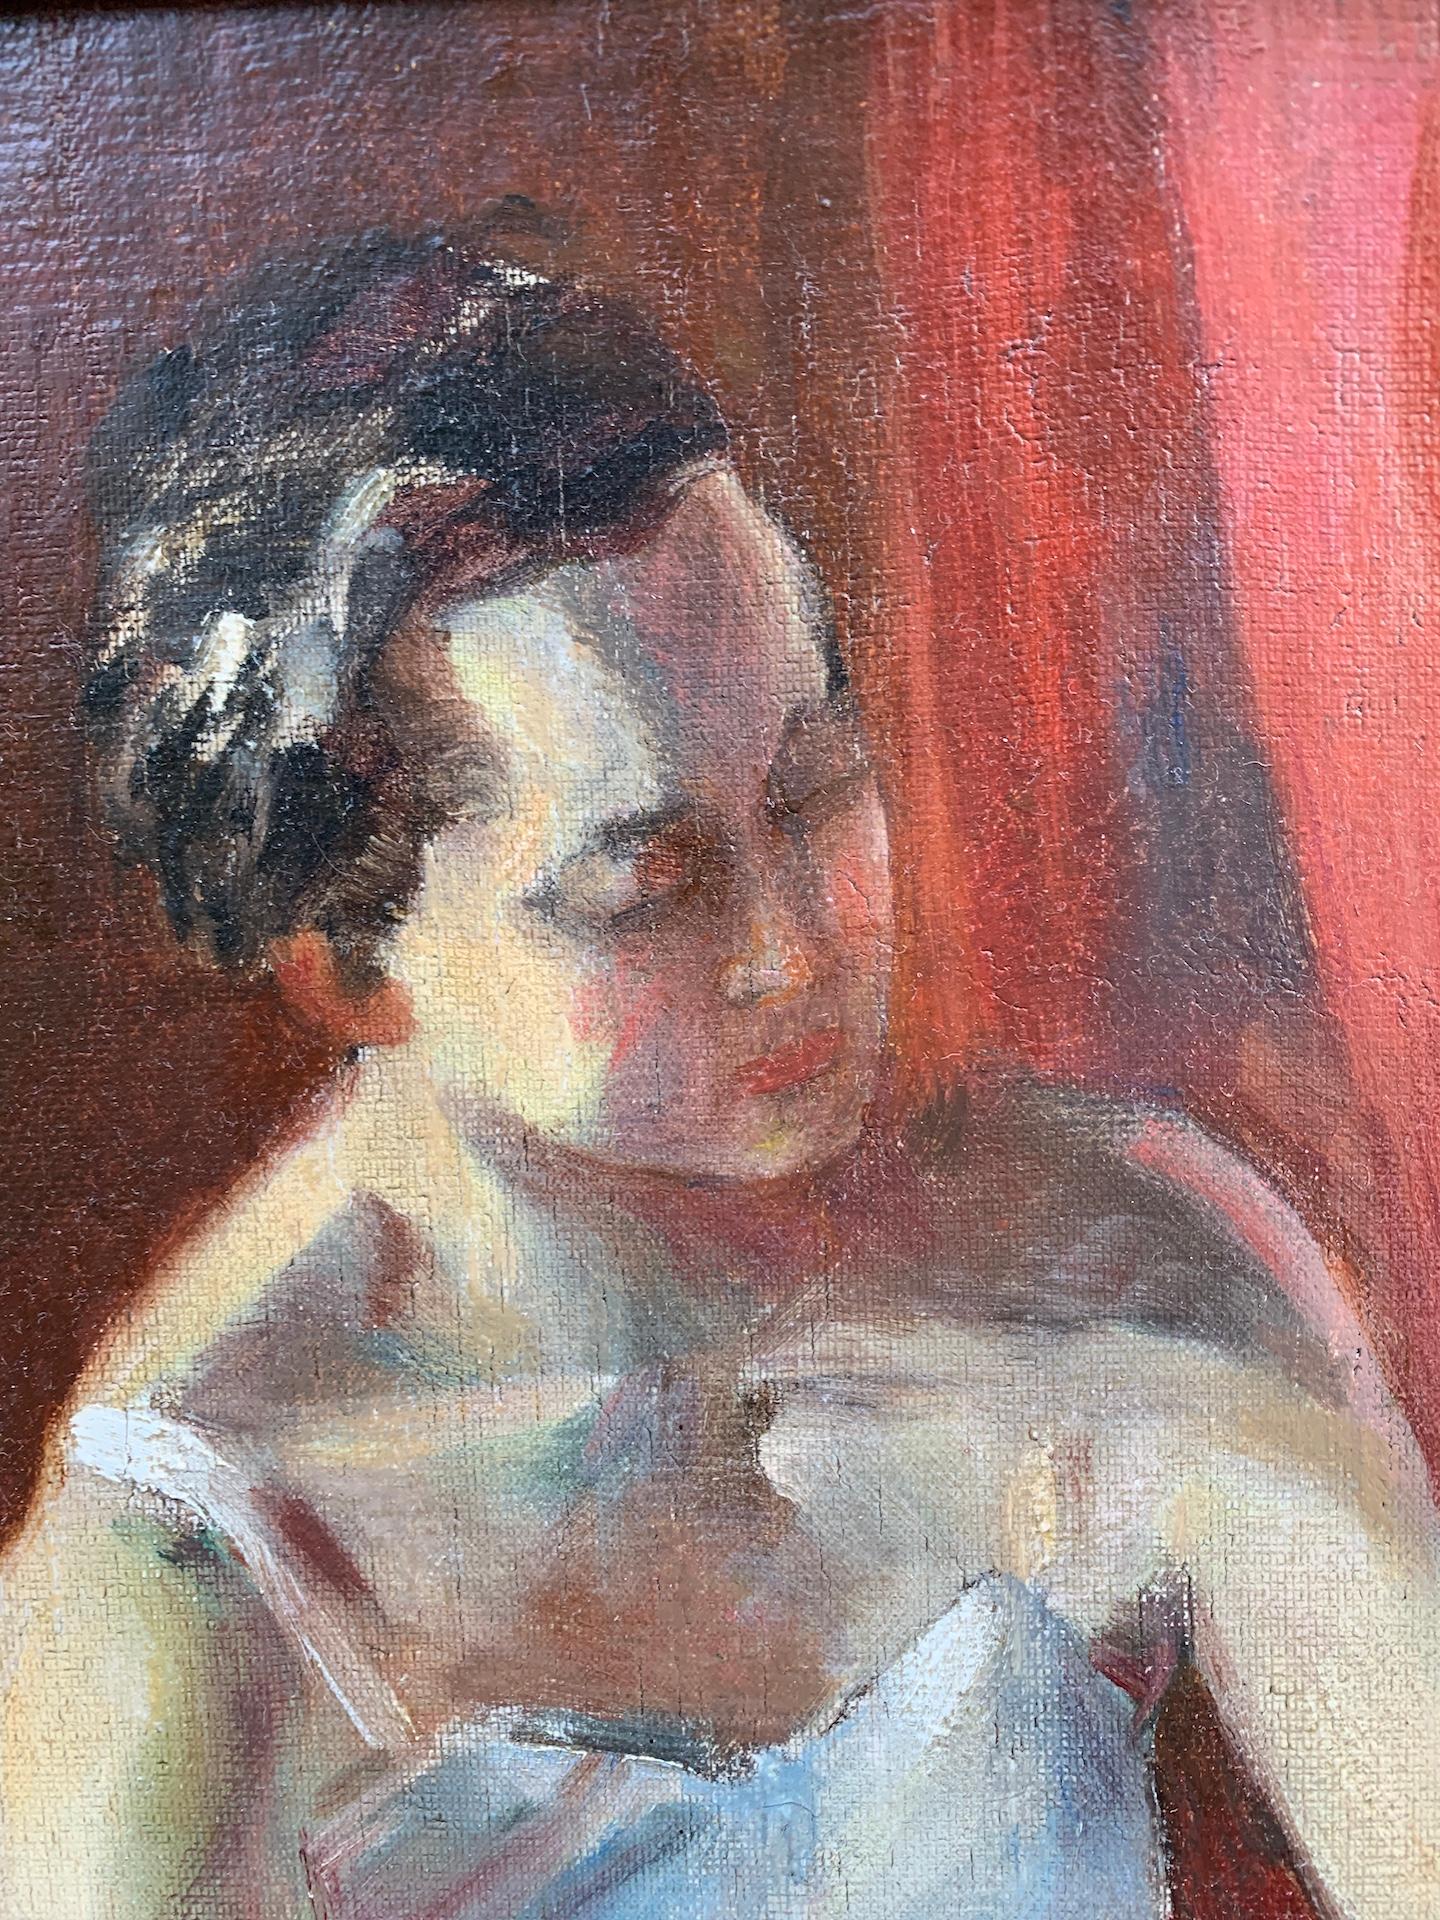 Very Impressive French Impressionist figure study of a Ballerina seated in an interior.

A very decorative and very desirable oil on canvas dating from the early 1900's

The painting has a great feeling and lights up any room with its well balanced